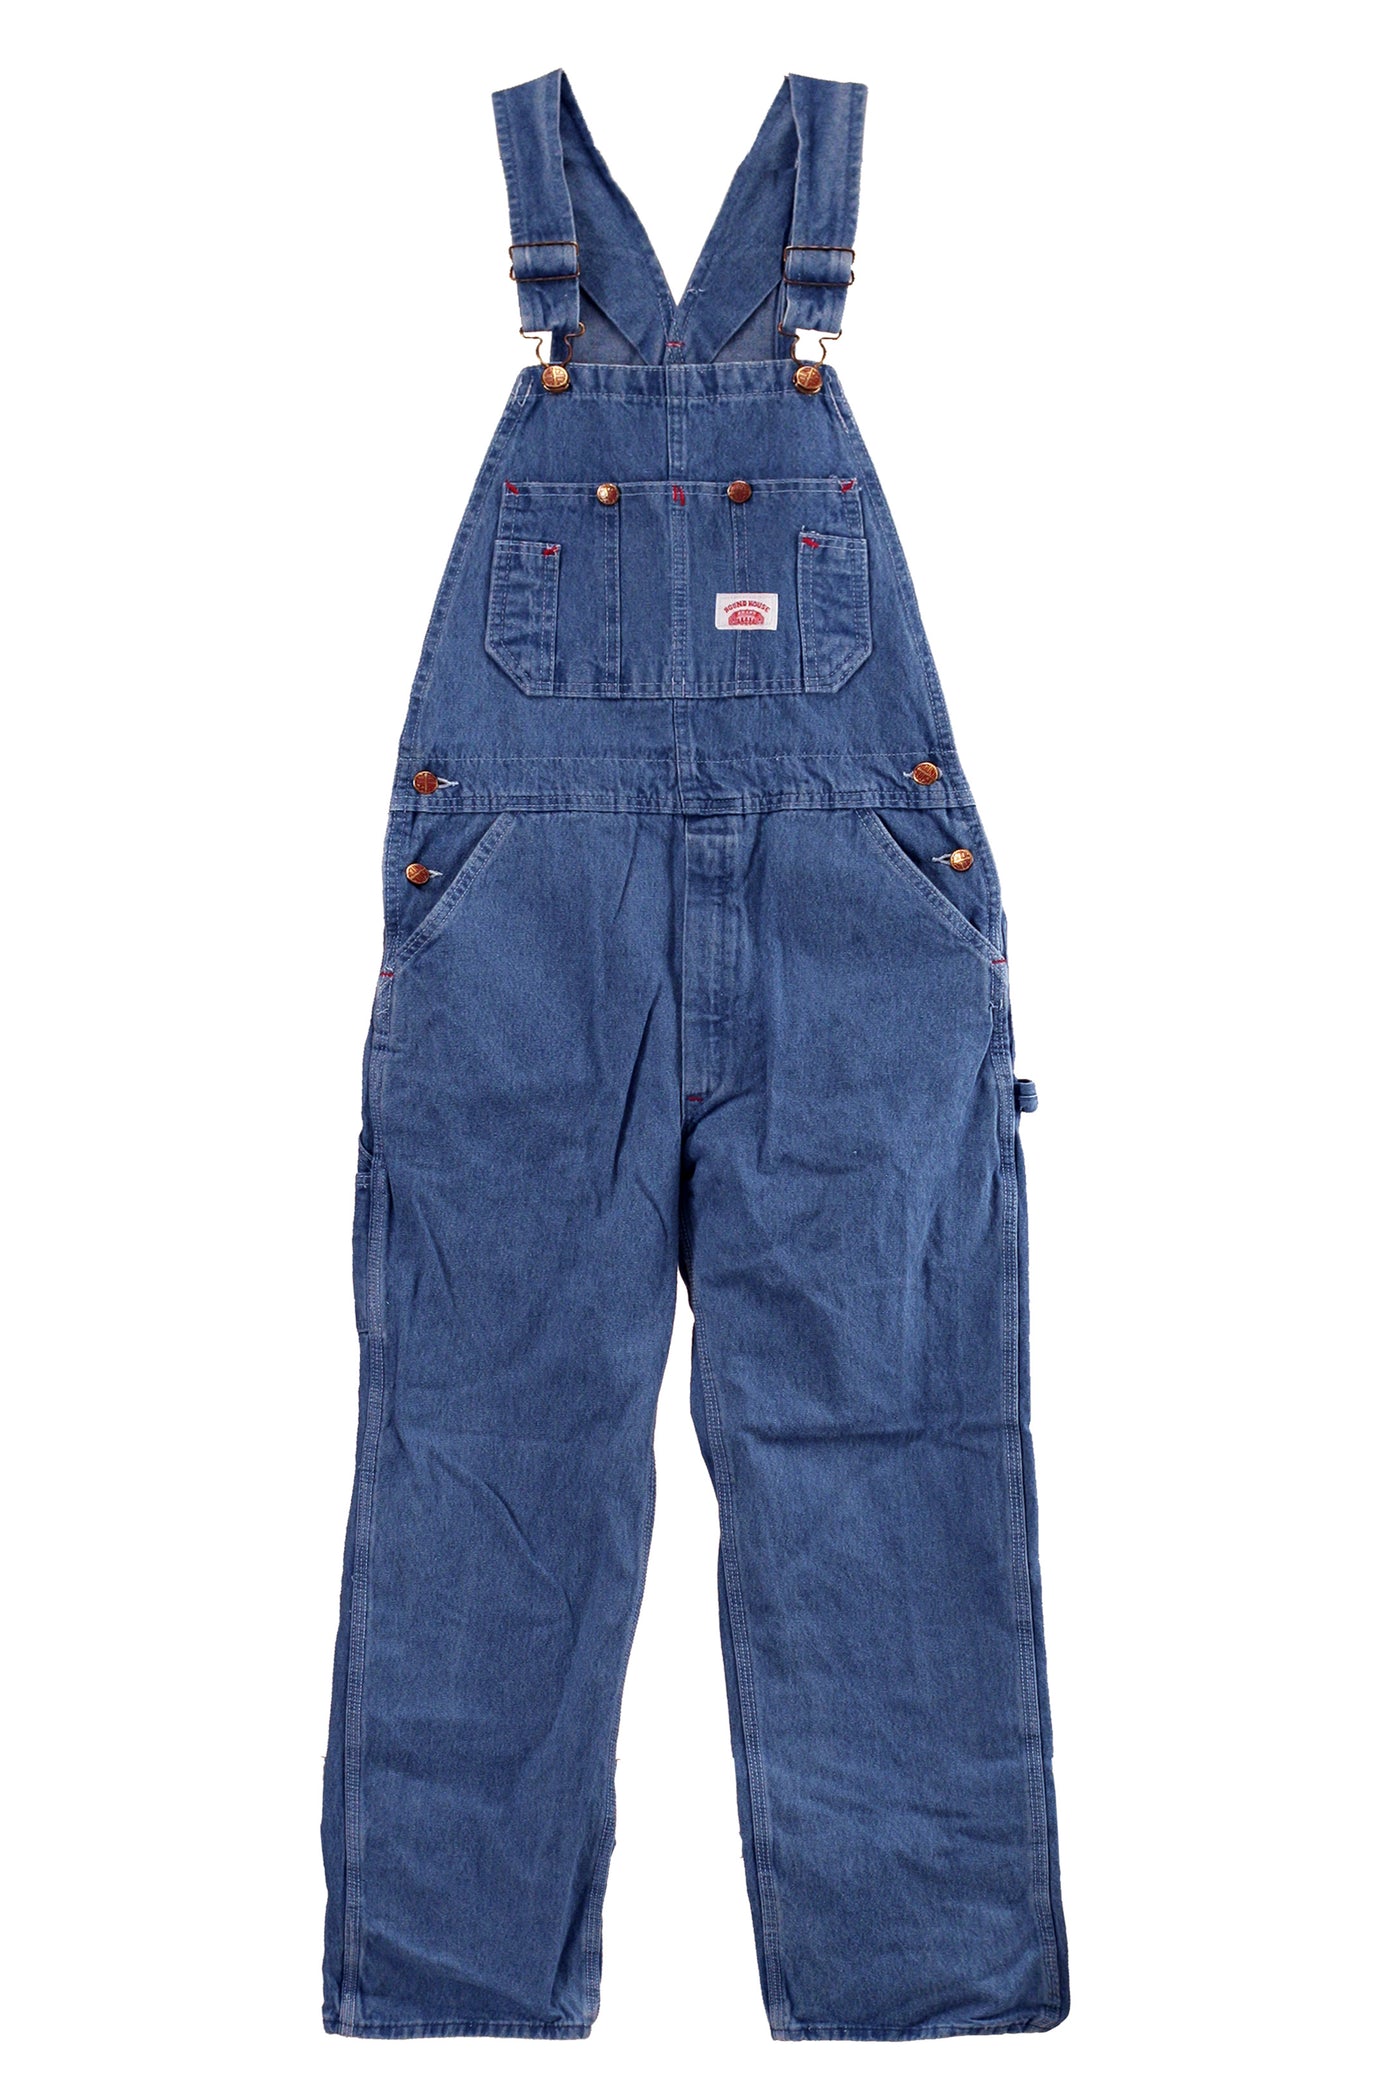 699 Stone Washed Bib Overalls - MADE IN USA – Round House Outlet